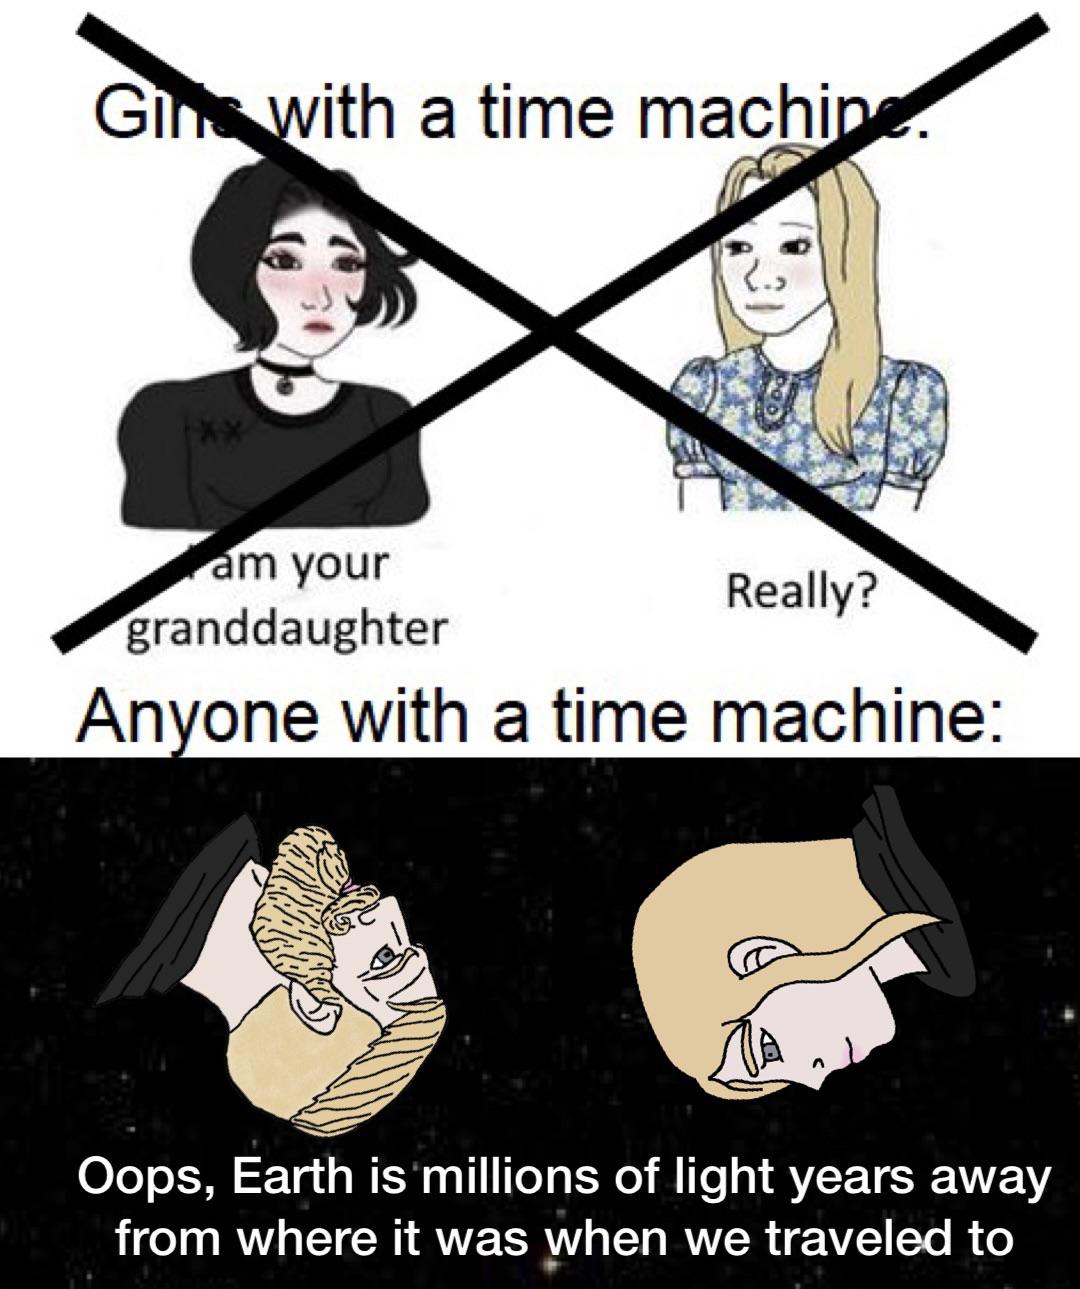 funny memes and pics - think green - Gin with a time machine. am your granddaughter Really? Anyone with a time machine Oops, Earth is millions of light years away from where it was when we traveled to